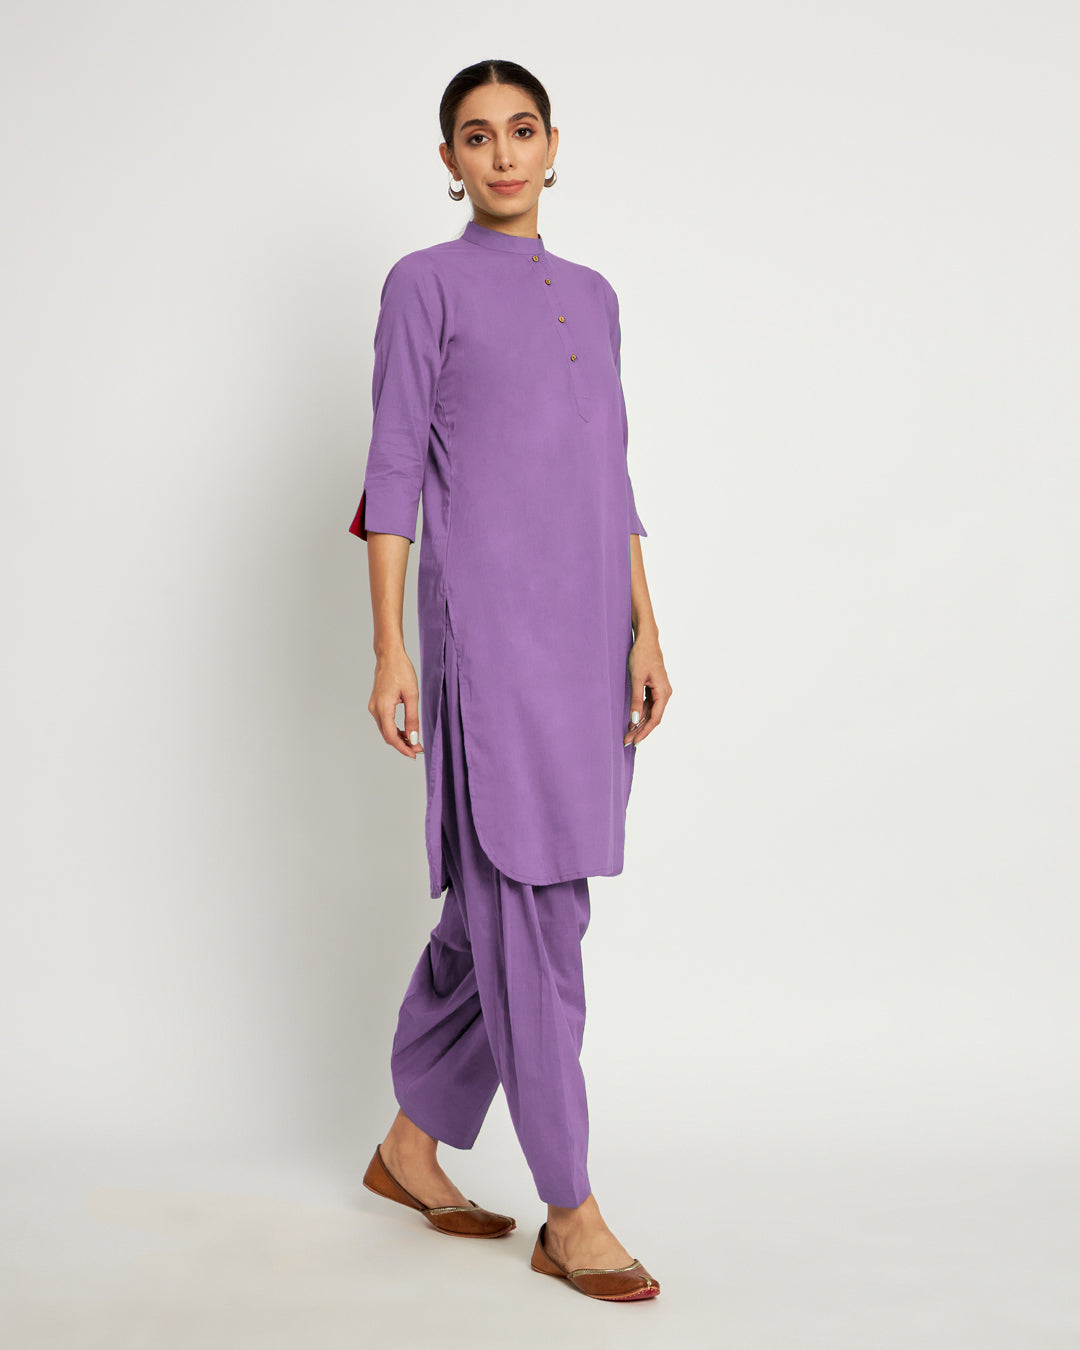 Wisteria Purple Band Collar Neck Solid Kurta (Without Bottoms)